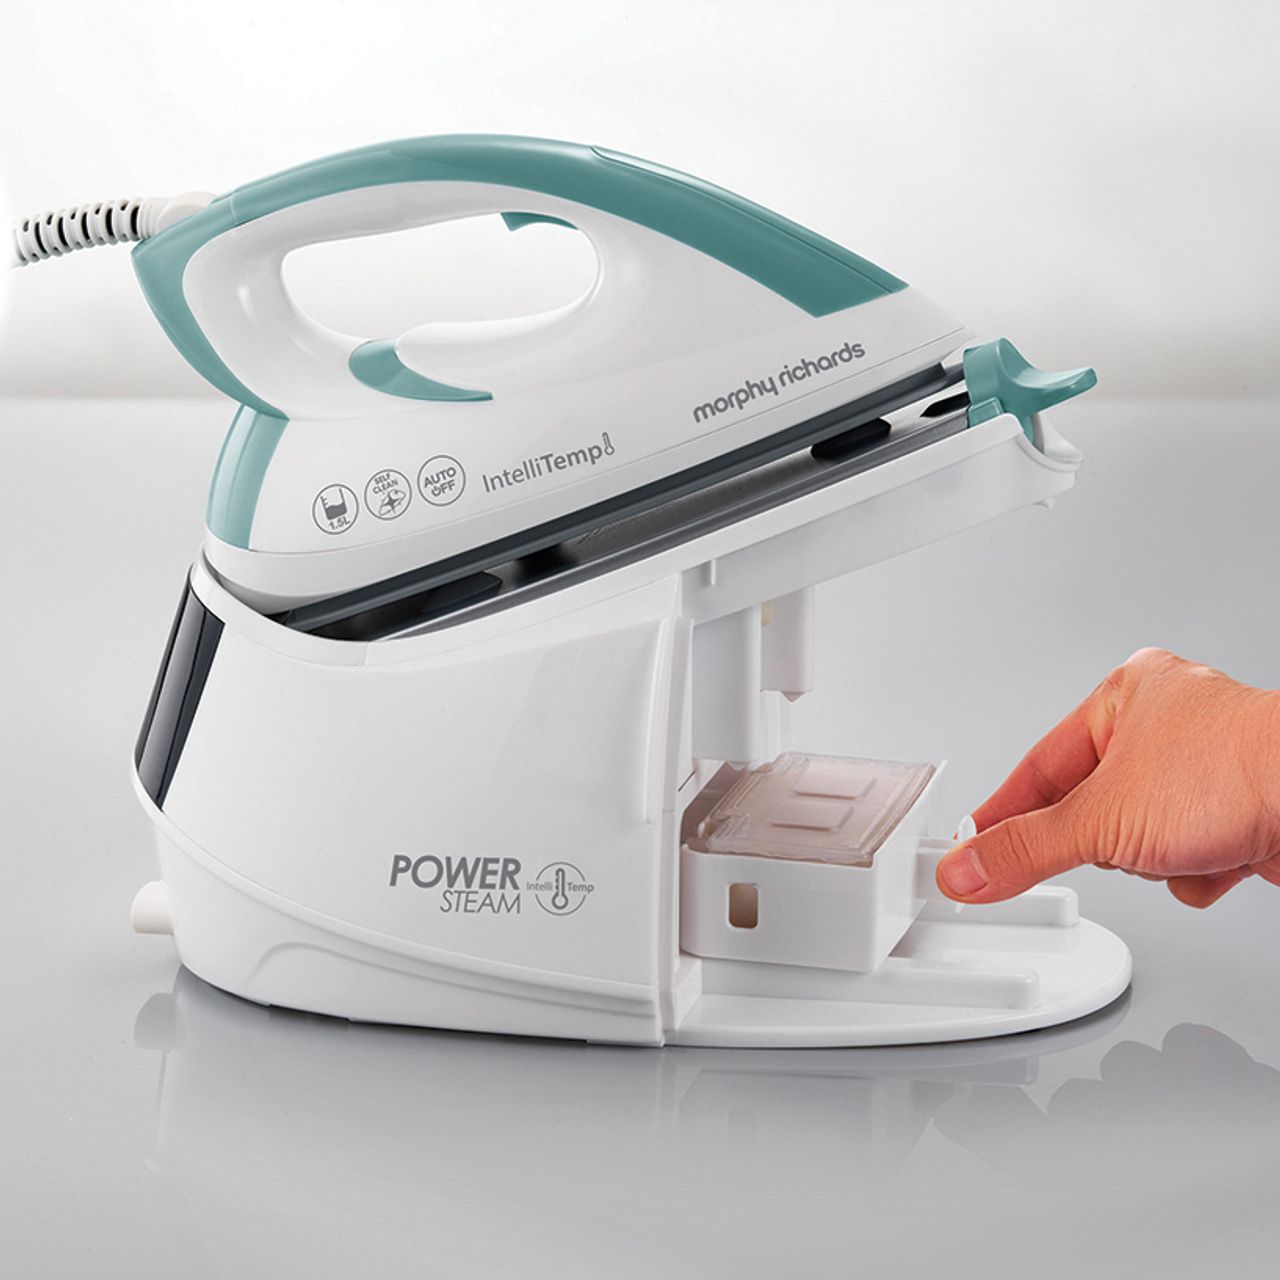 Recollection One sentence Circumference 333300_GRW | Morphy Richards Steam Generator Iron | ao.com